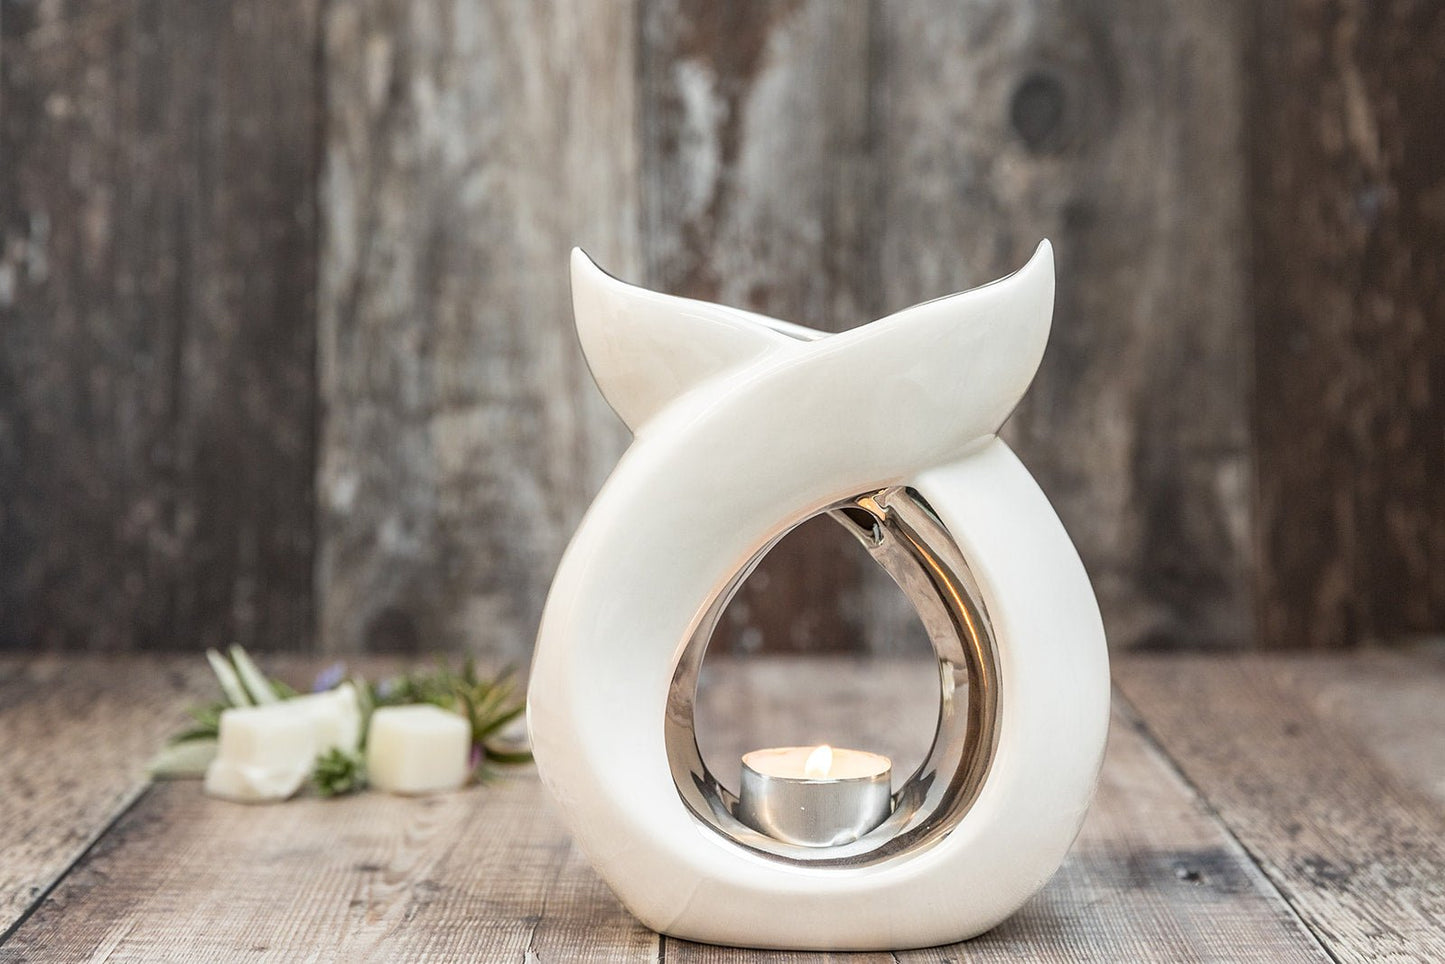 White Twist And Crossover Tea Light Wax Burner - A Melt In Time Ltd